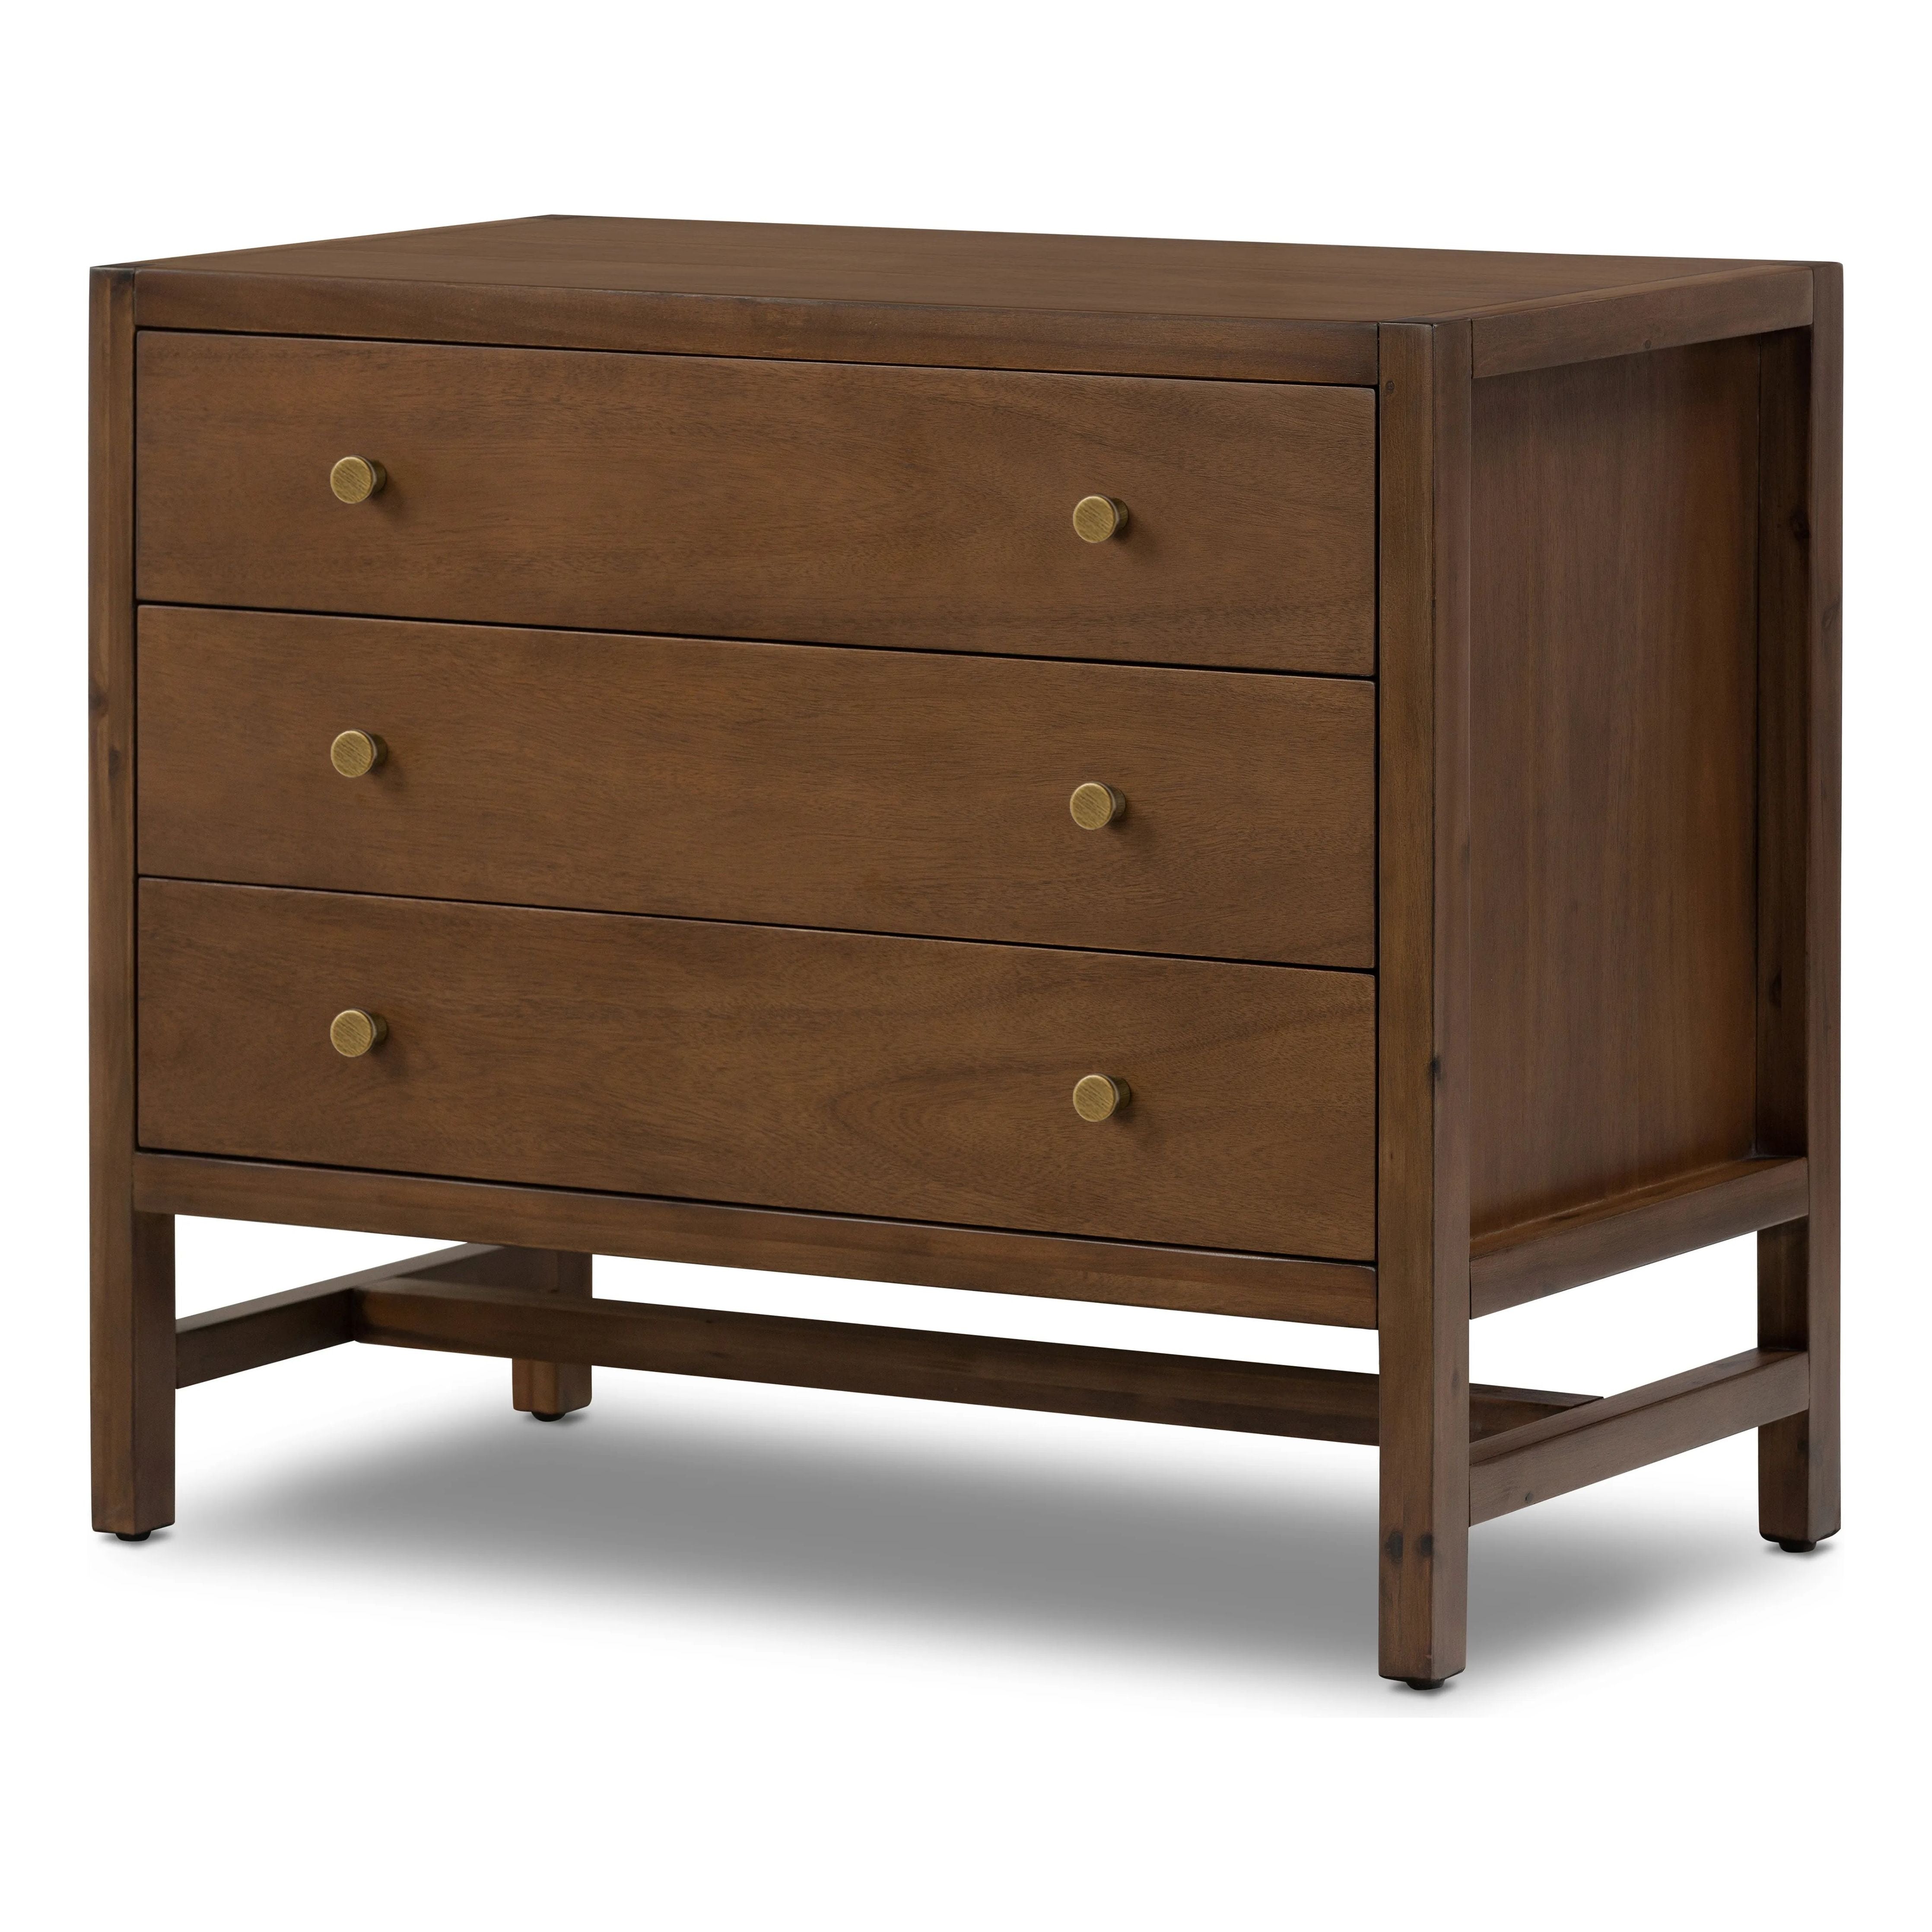 A simple, heavy wood Parsons-style nightstand with three drawers for ample storage. Finished in solid ash with brass hardware Amethyst Home provides interior design, new home construction design consulting, vintage area rugs, and lighting in the Washington metro area.